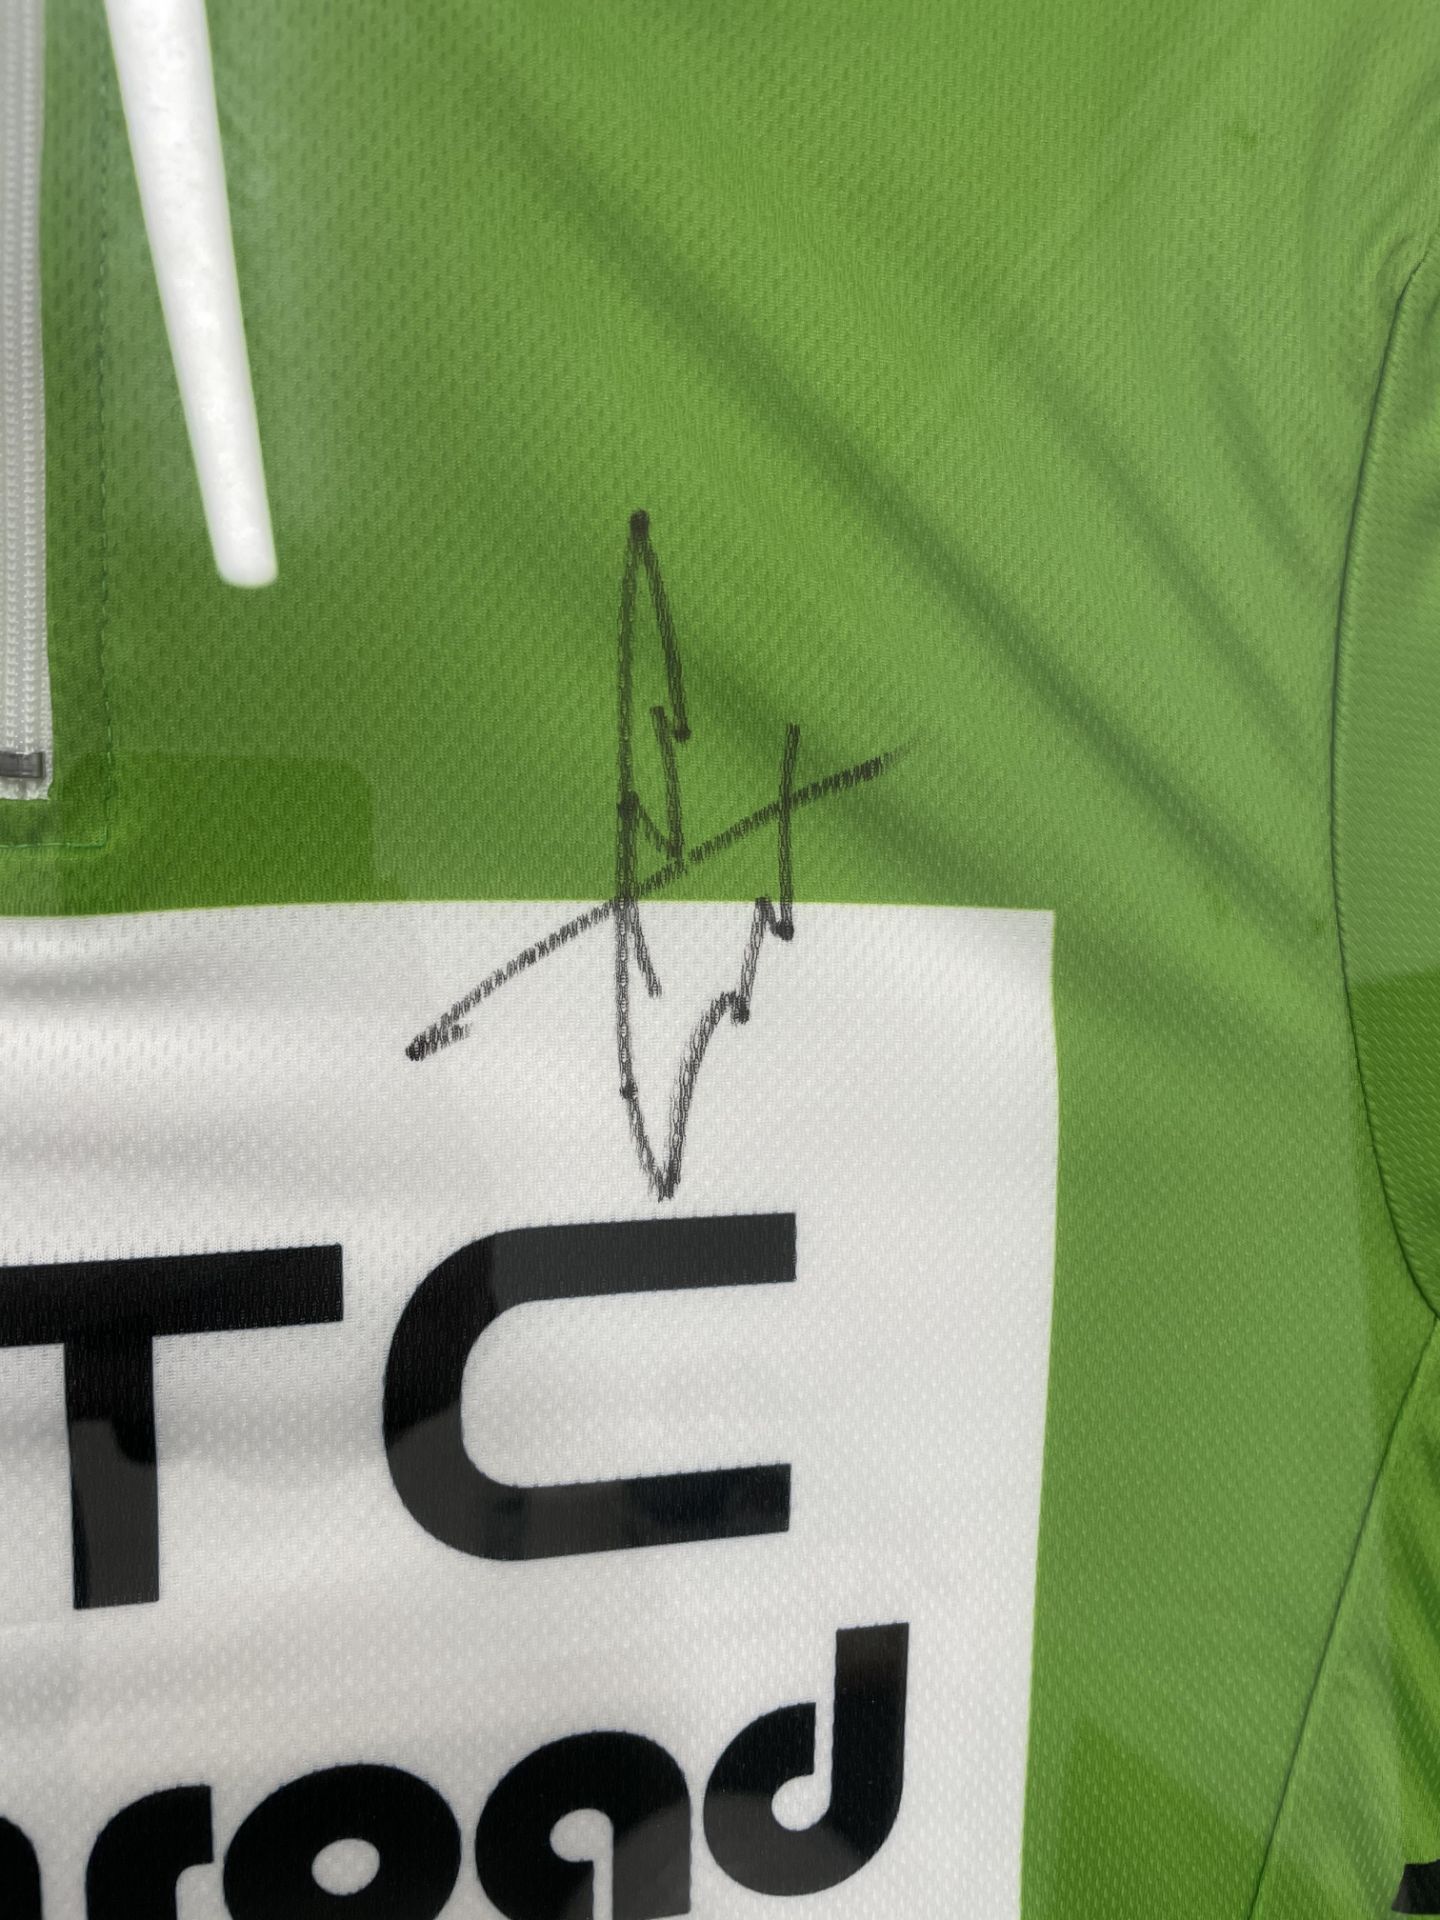 Mark Cavendish Framed & Signed Green HTC Highroad Cycling Jersey - Image 2 of 2